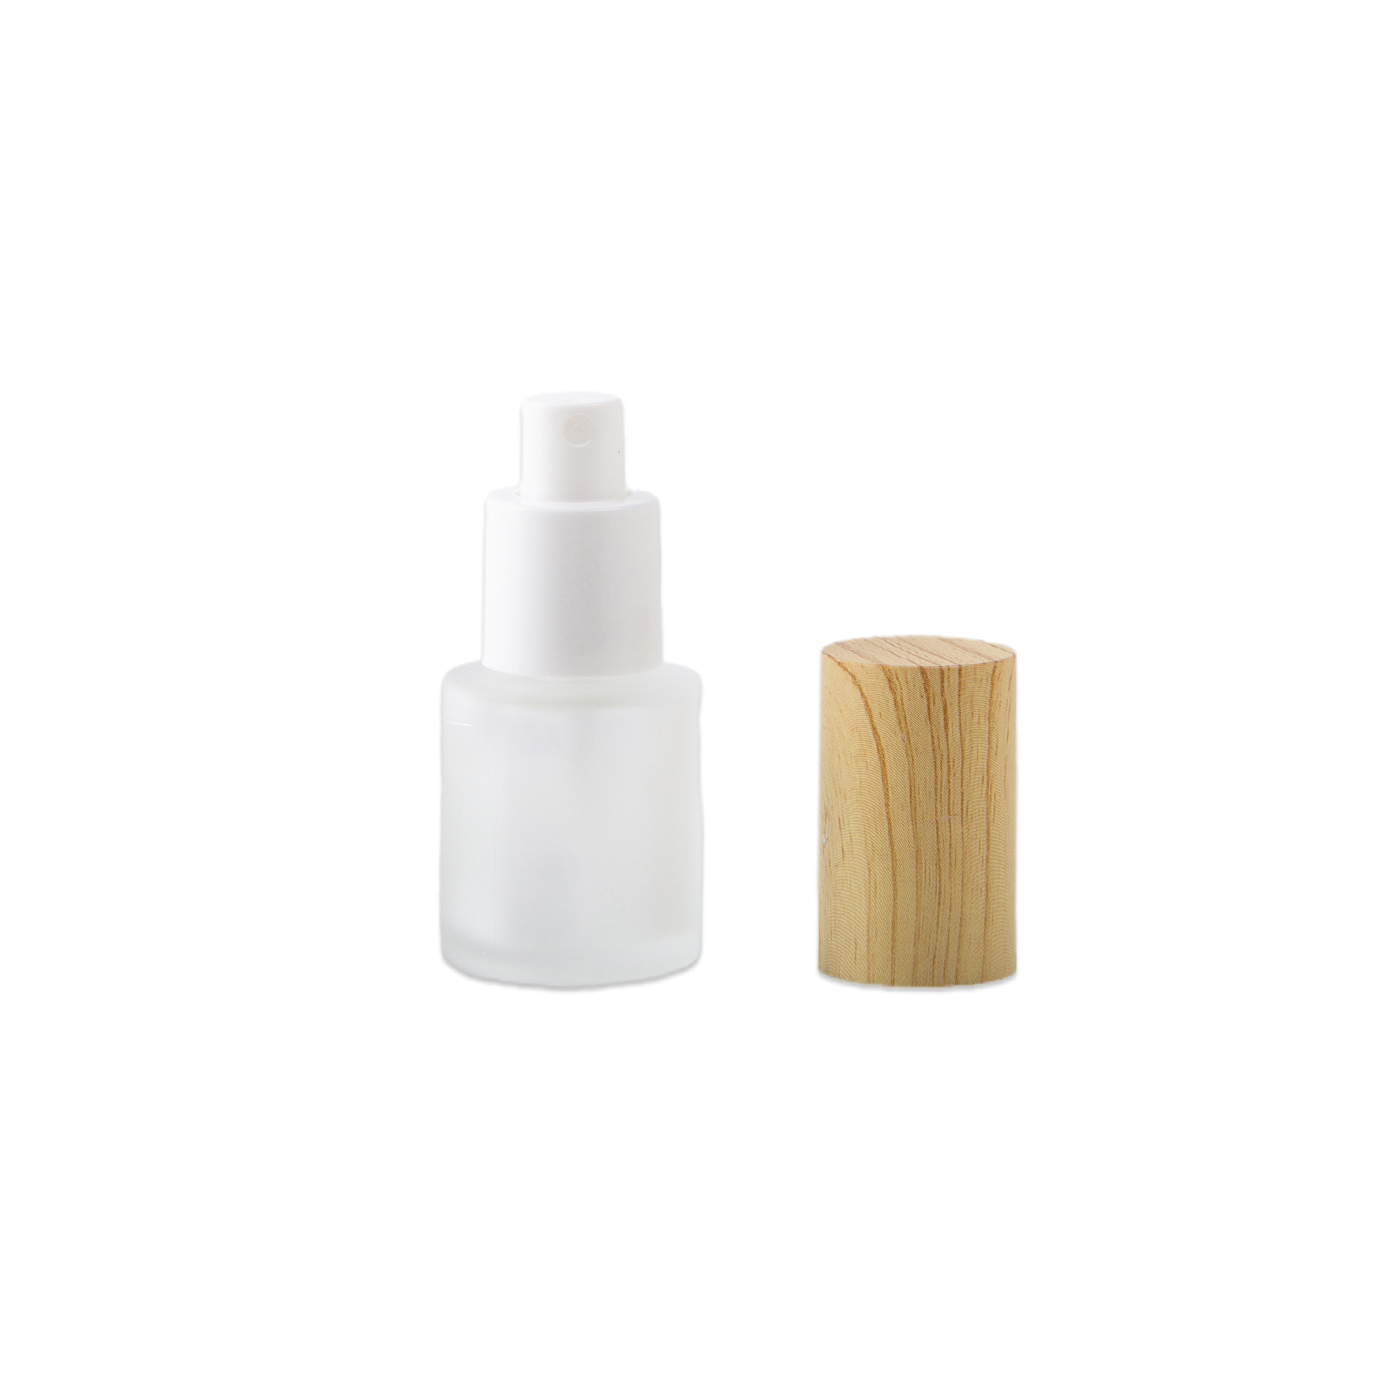 20ml Glass Spray Bottle With Wood Cap2